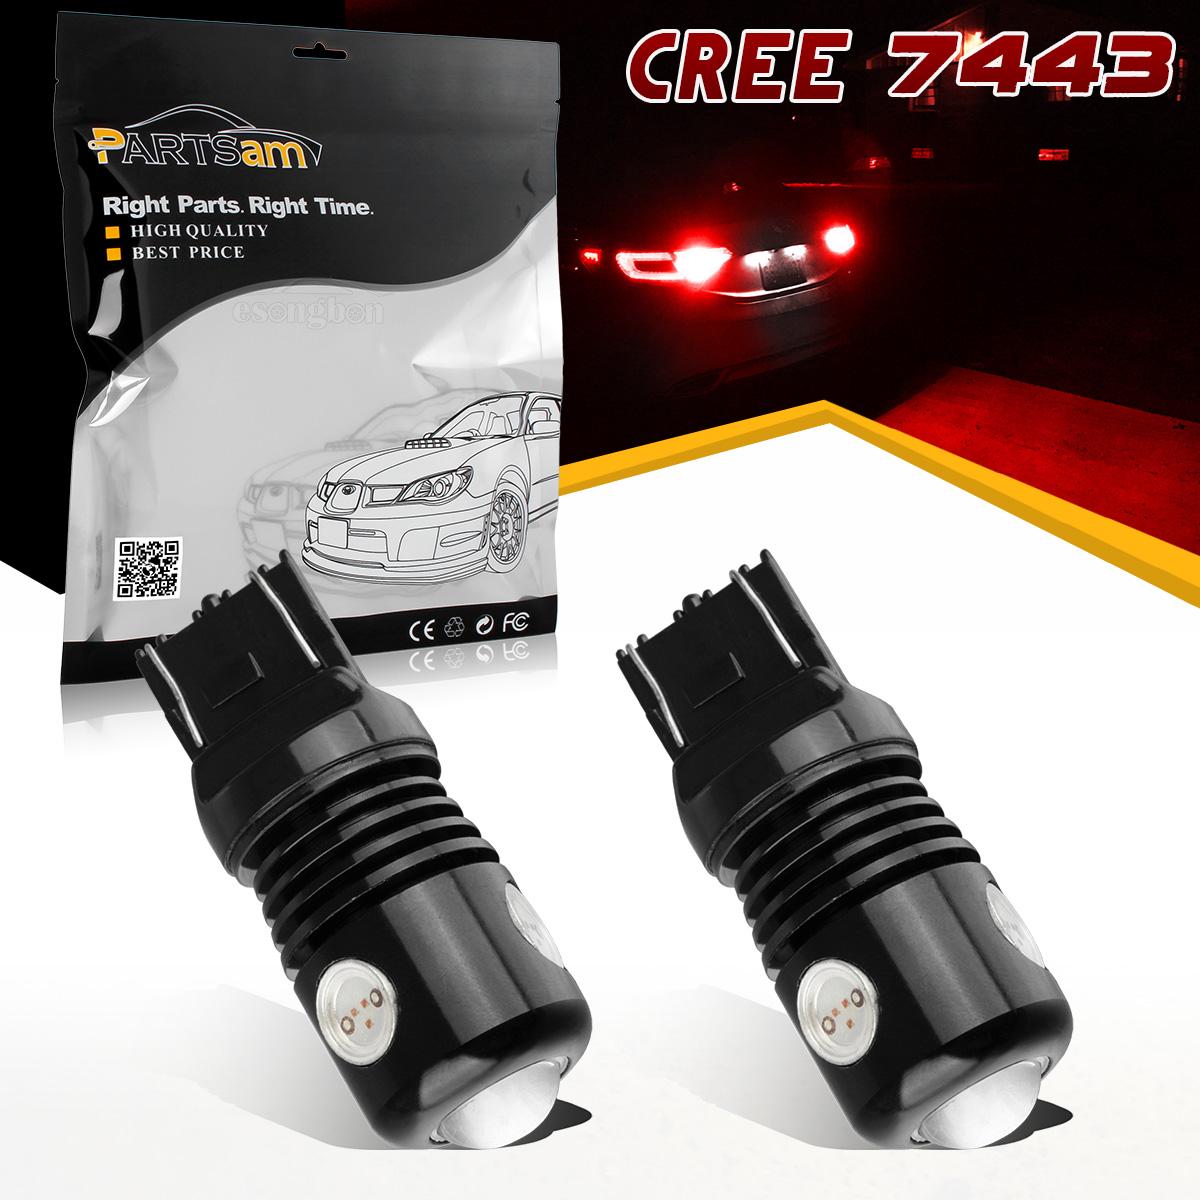 CREE 7443 7440 T20 LED Tail//Brake//Stop Signal Light ULTRA BRIGHT RED Bulb 2800LM